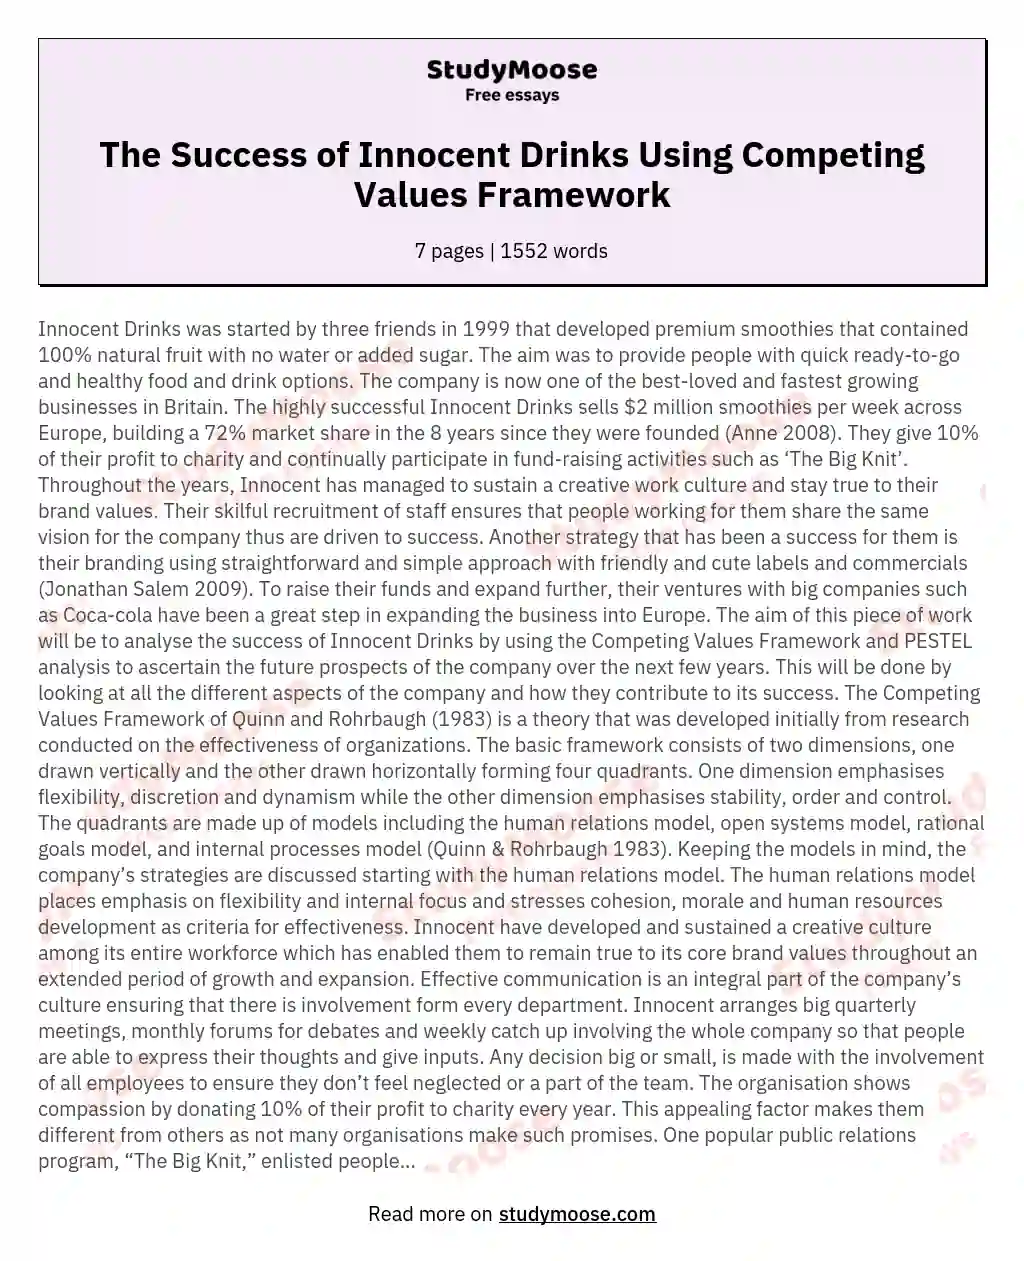 The Success of Innocent Drinks Using Competing Values Framework essay